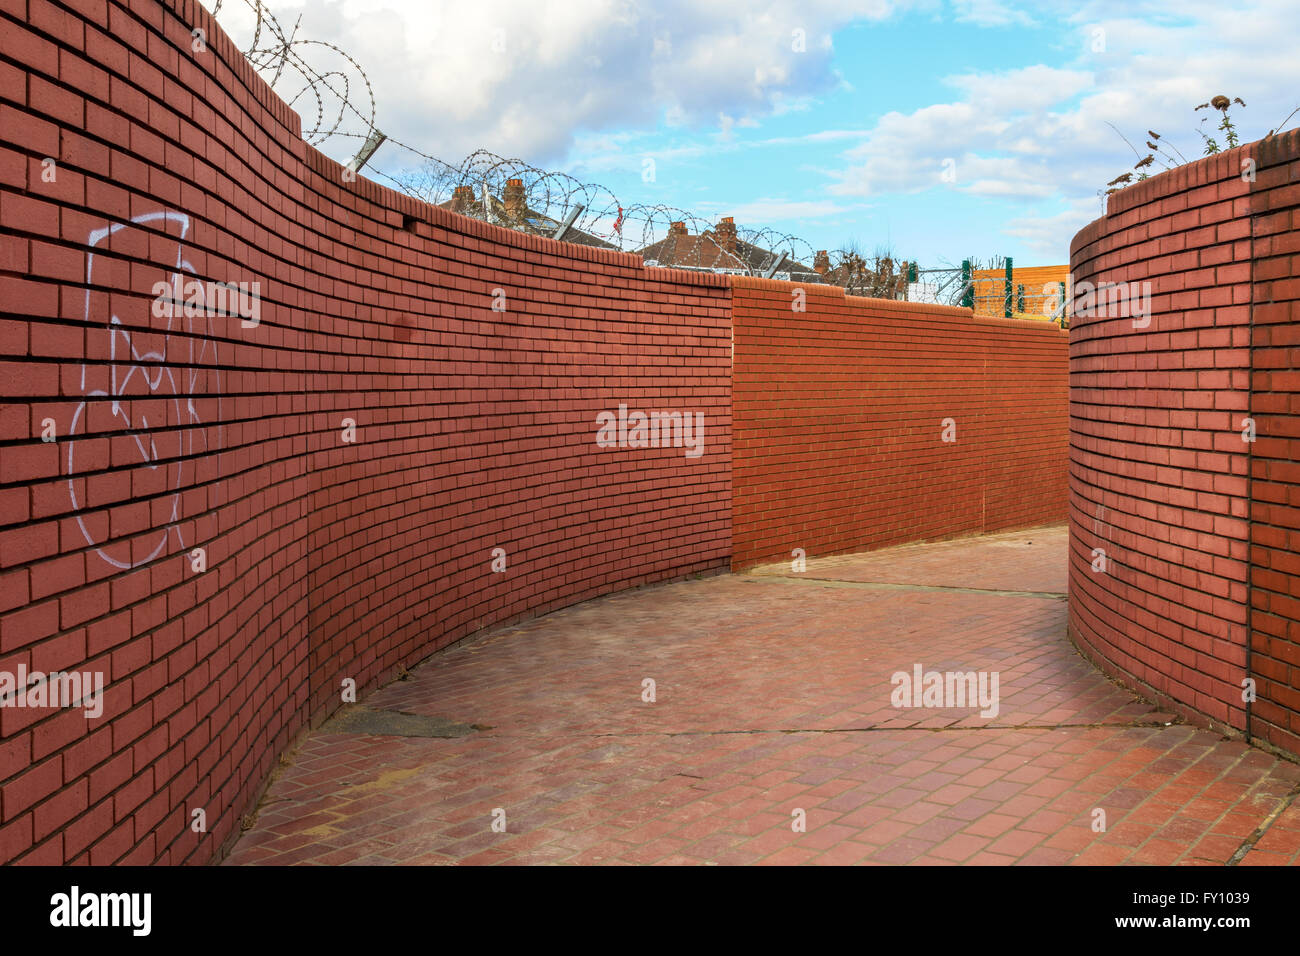 Curving walled path with graffitied red brick walls topped with barbed wire Stock Photo